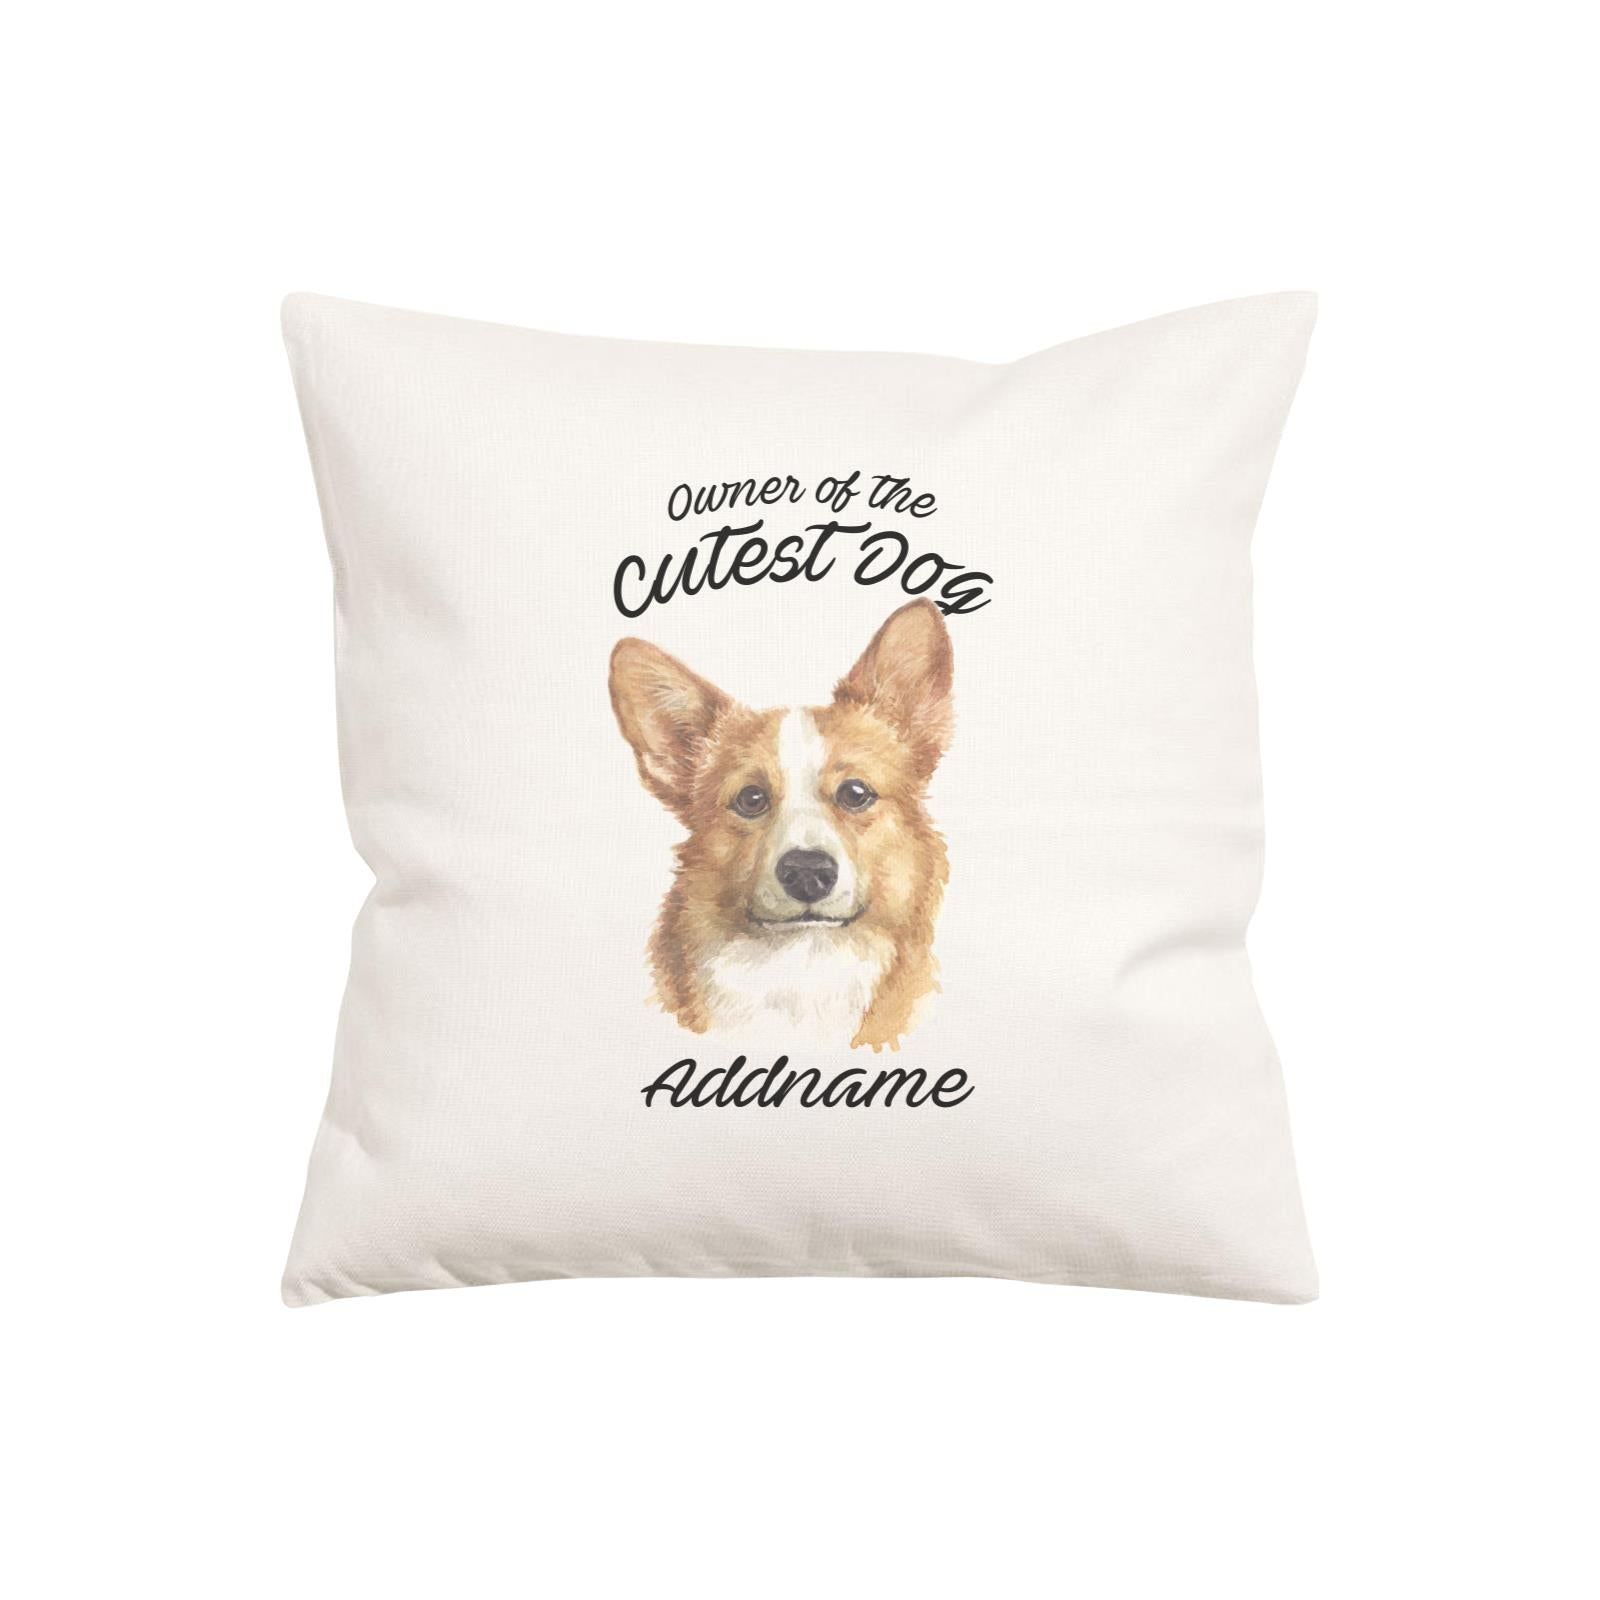 Watercolor Dog Owner Of The Cutest Dog Welsh Corgi Addname Pillow Cushion